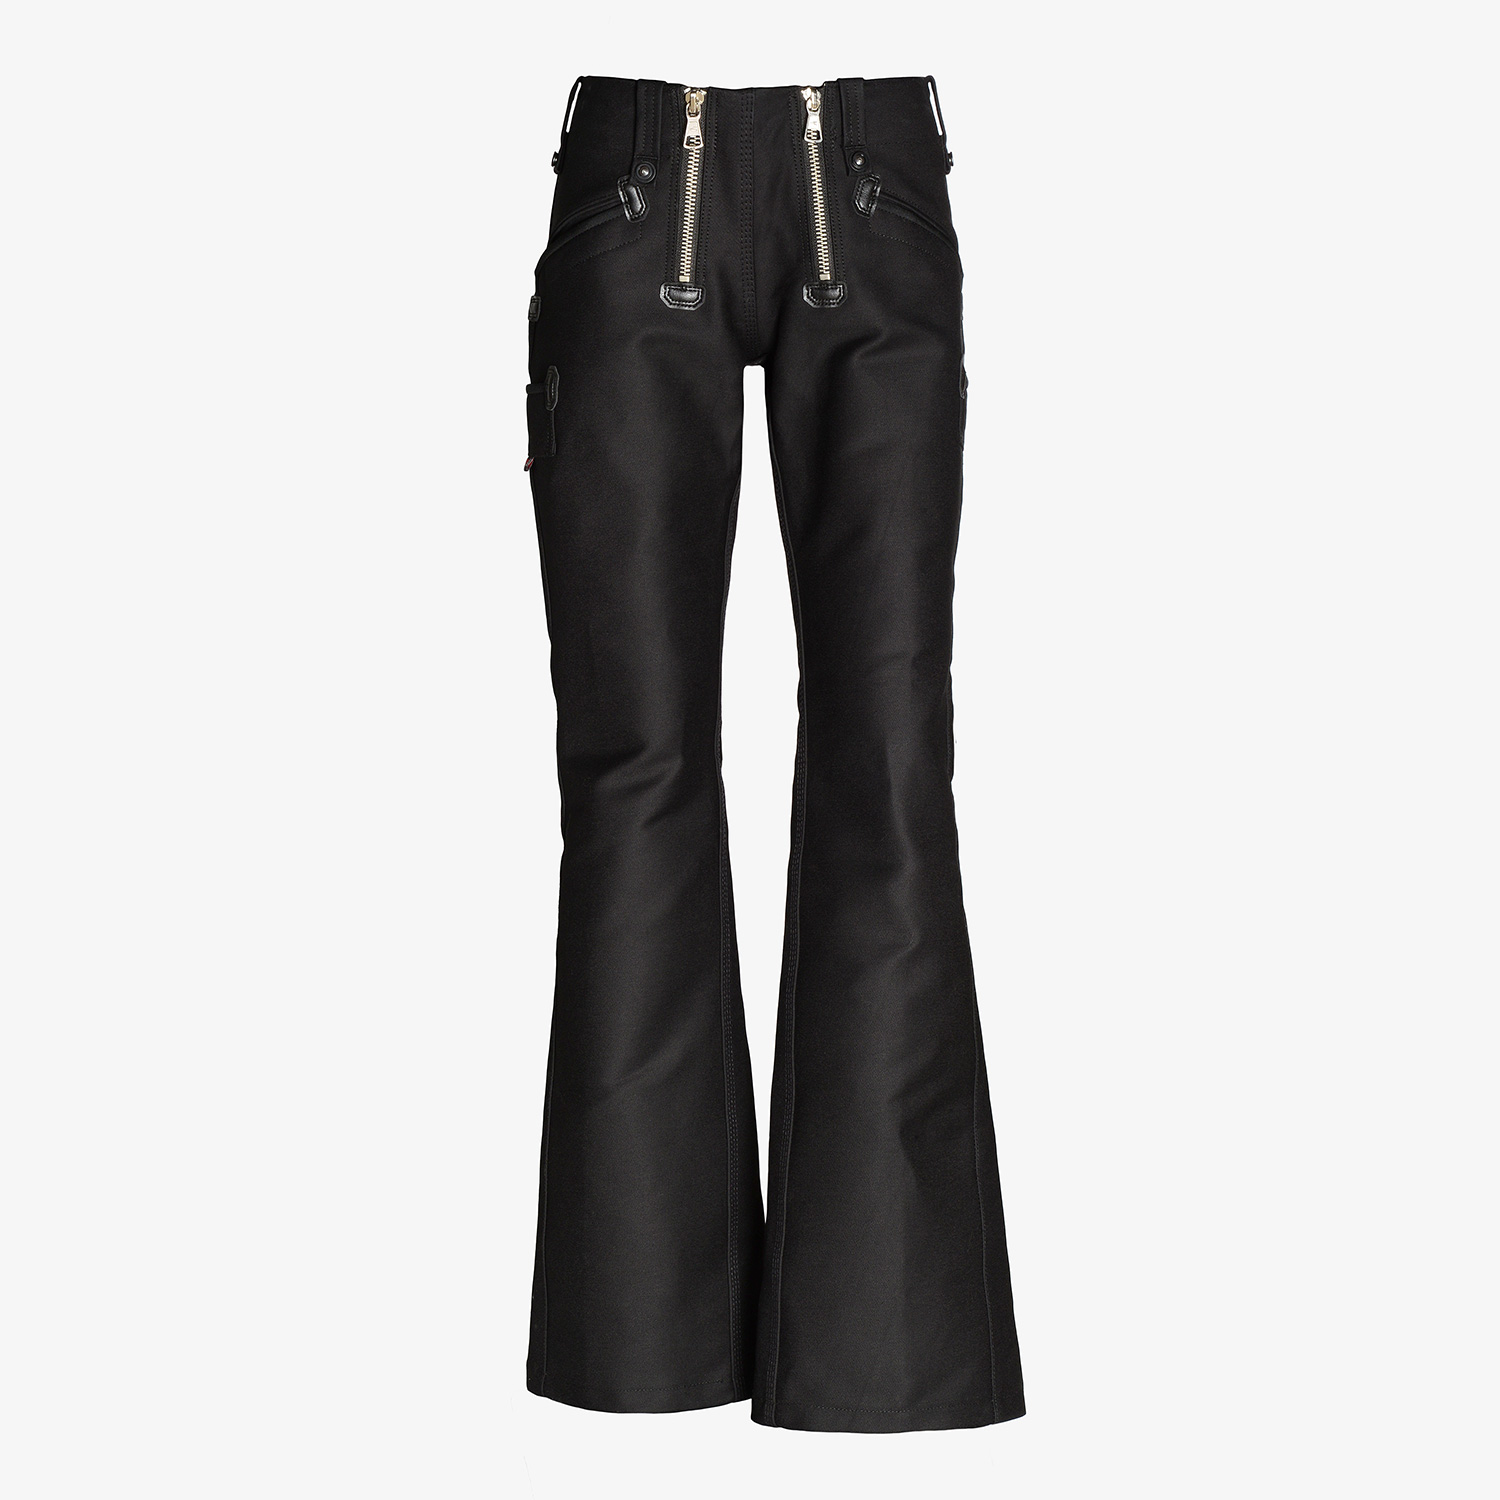 ADA guild moleskin trousers with bell bottom